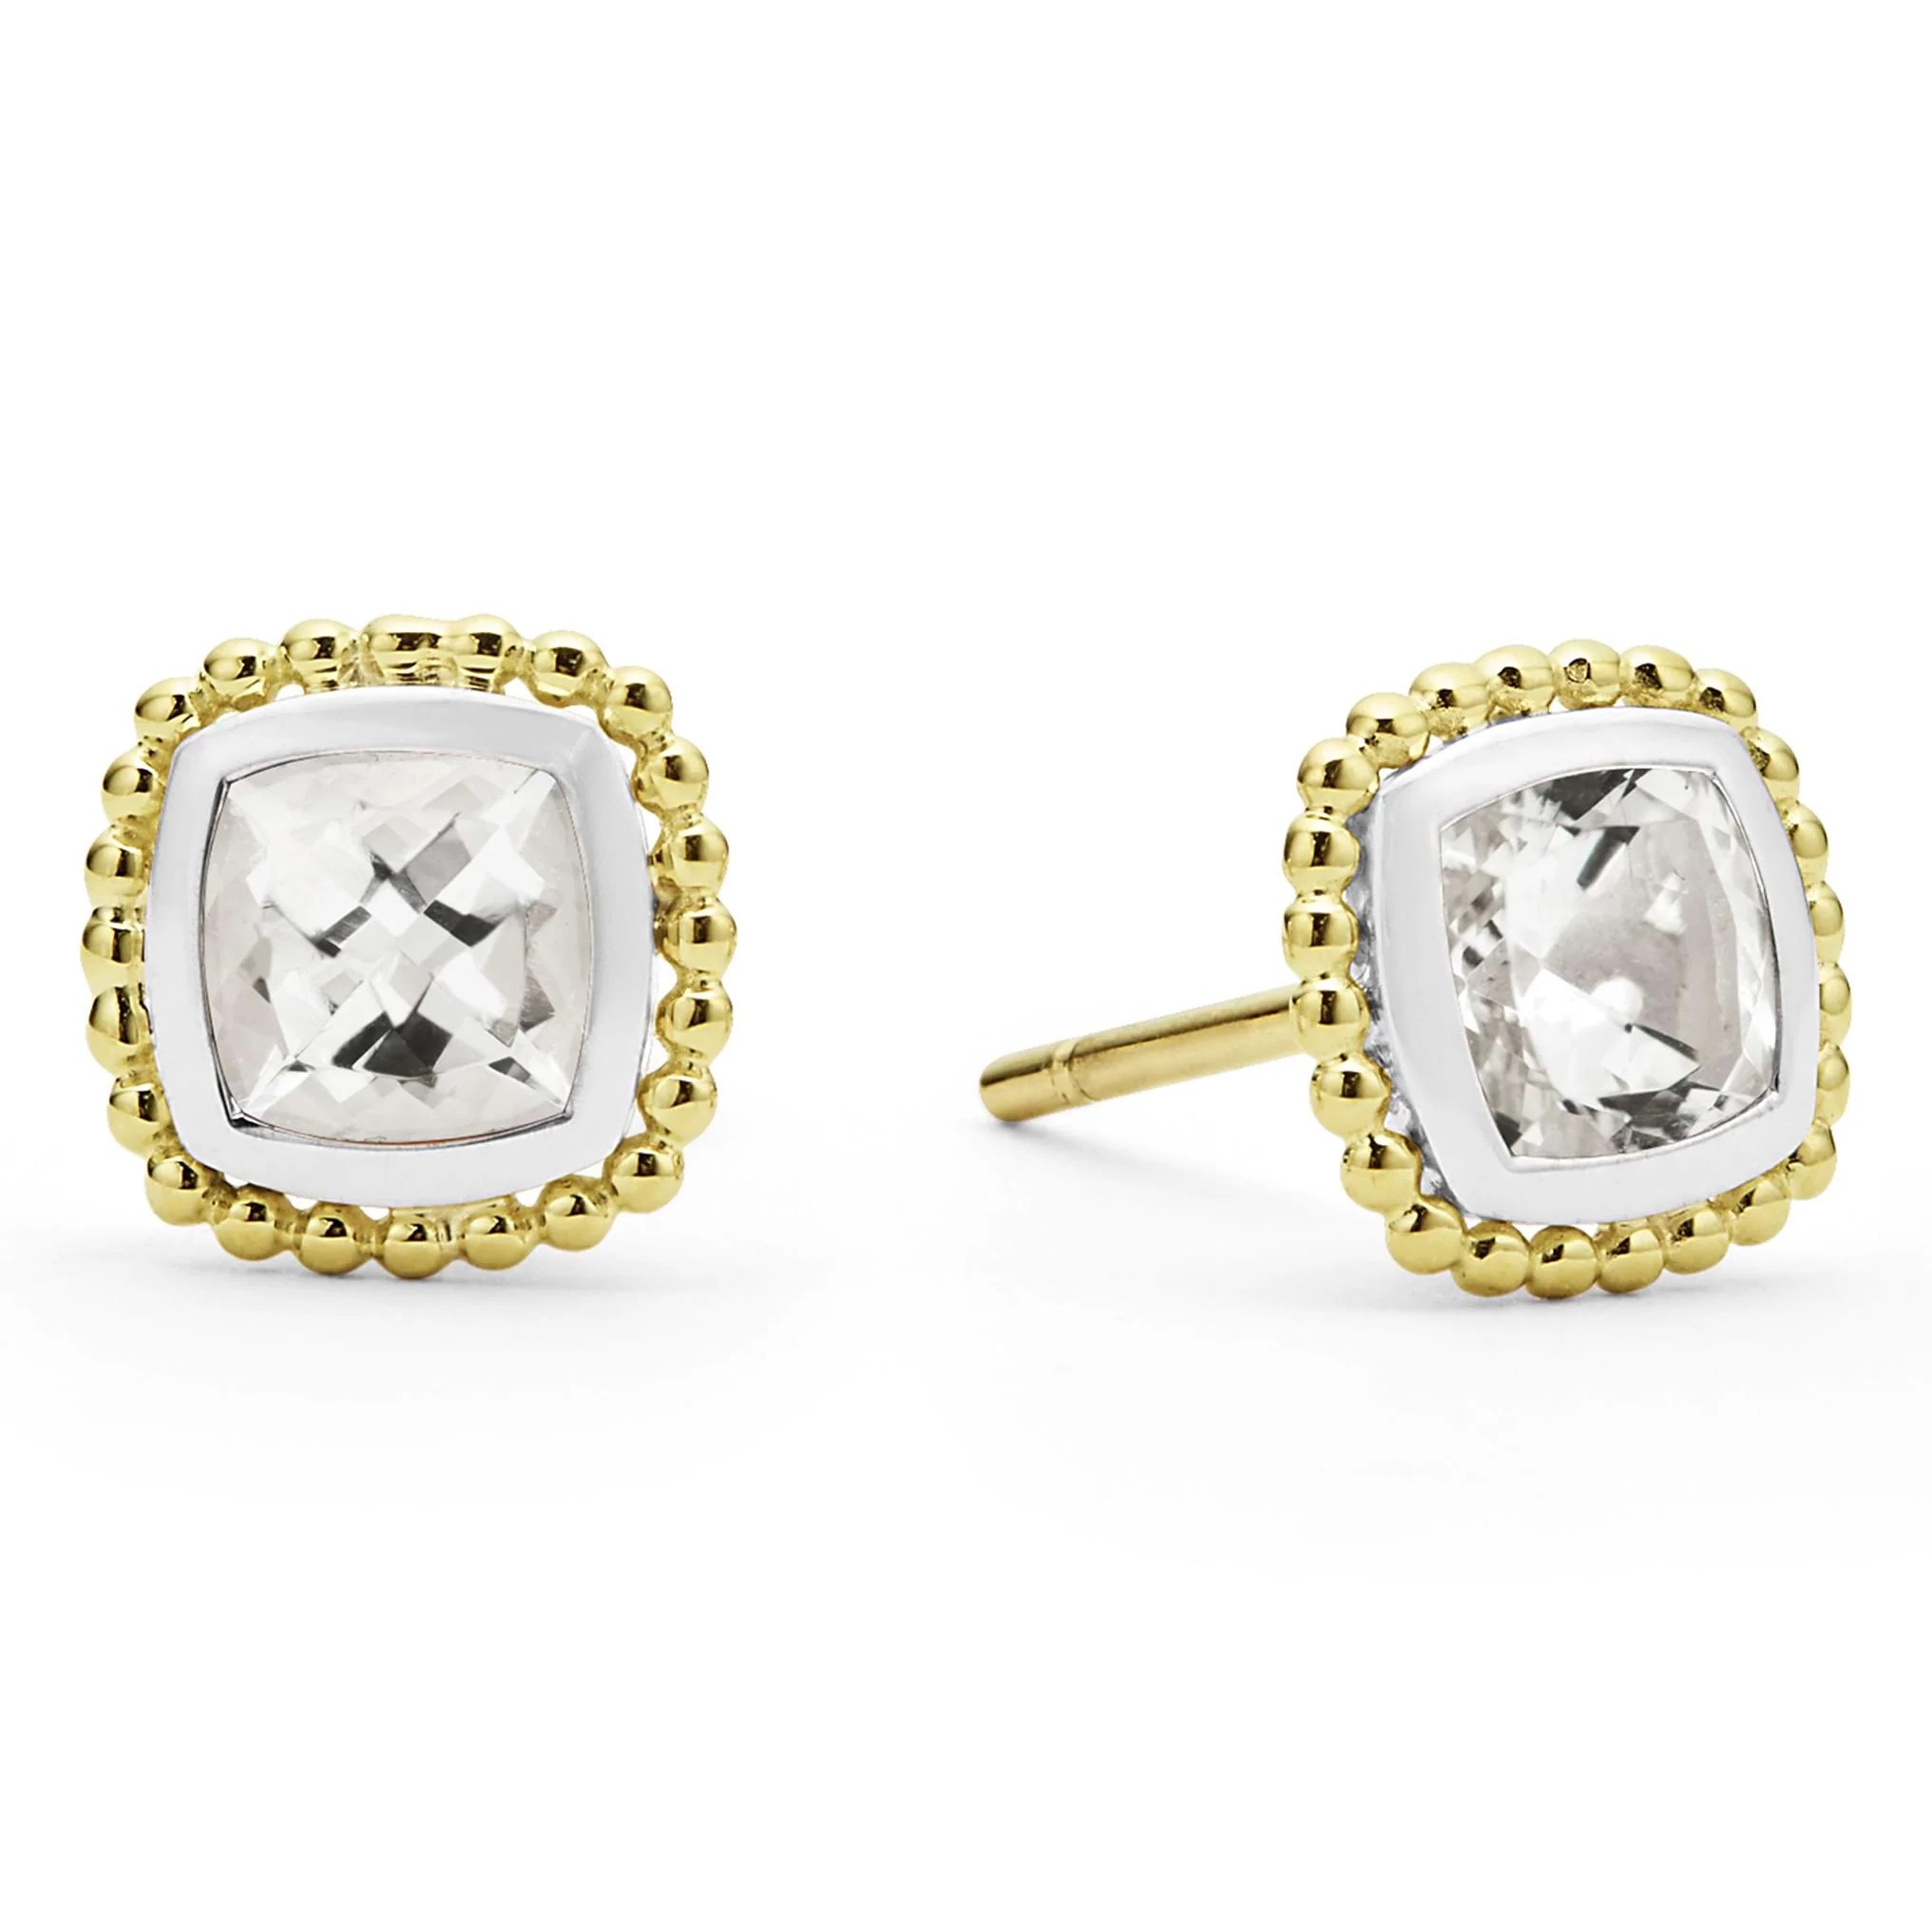 Lagos Sterling Silver & 18K Yellow Gold Caviar Color with 2 White Topaz 5mm Stones 8X8 Stud Earrings